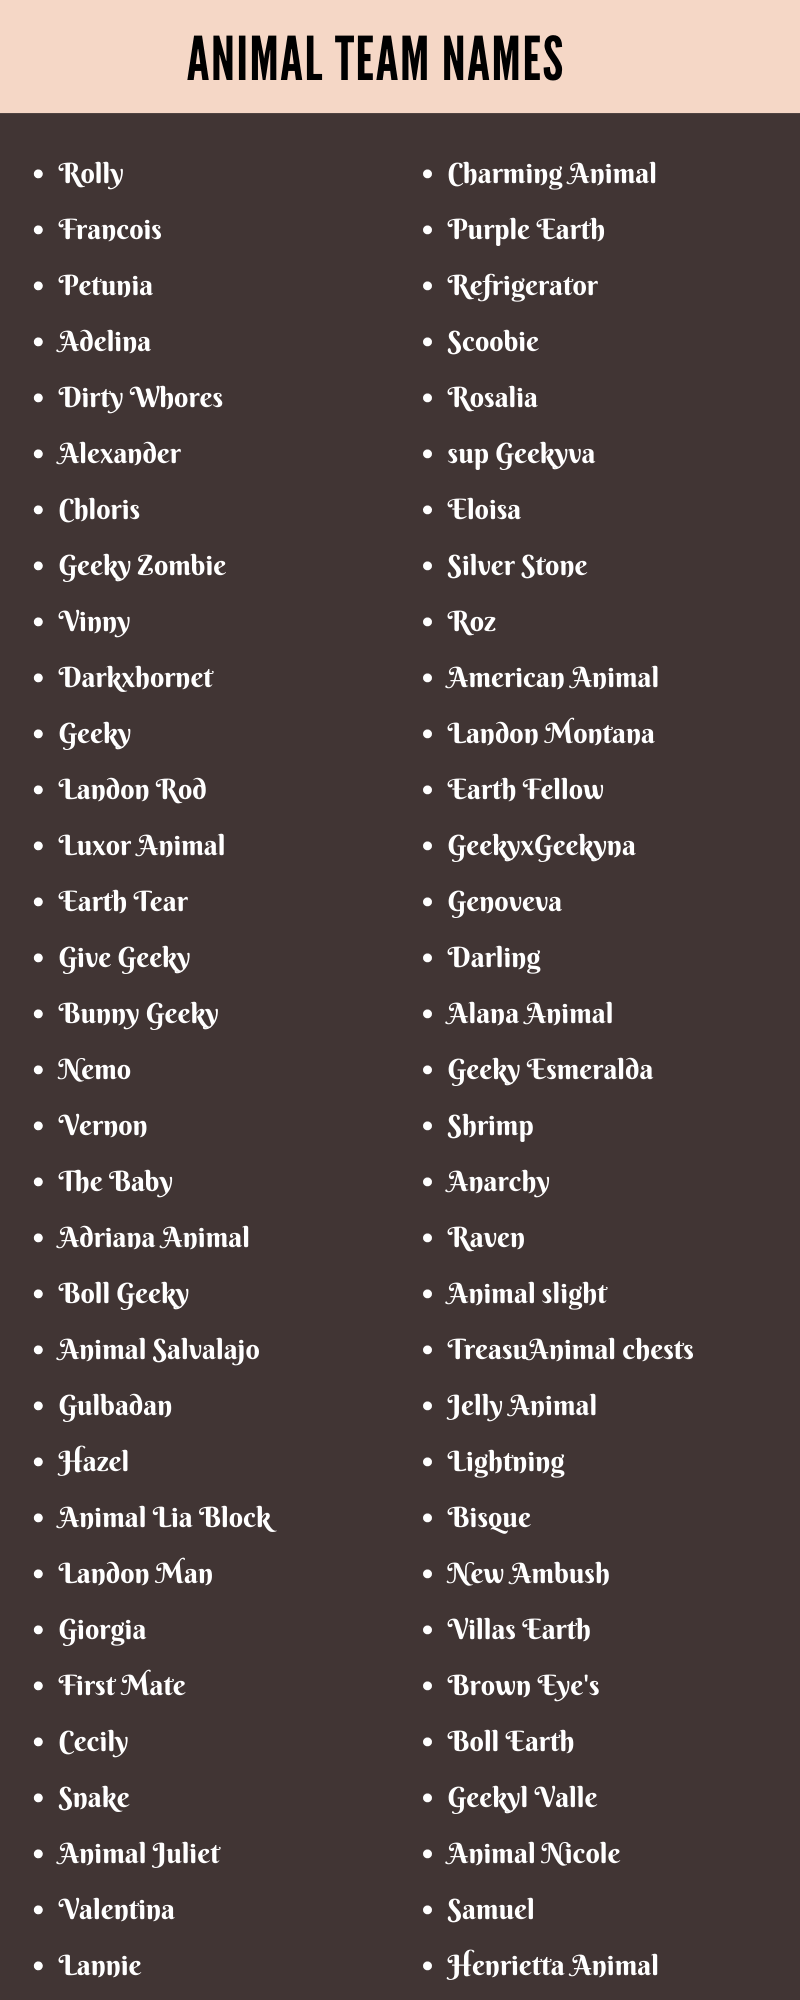 20 Cool Animal Team Names Ideas and Suggestions